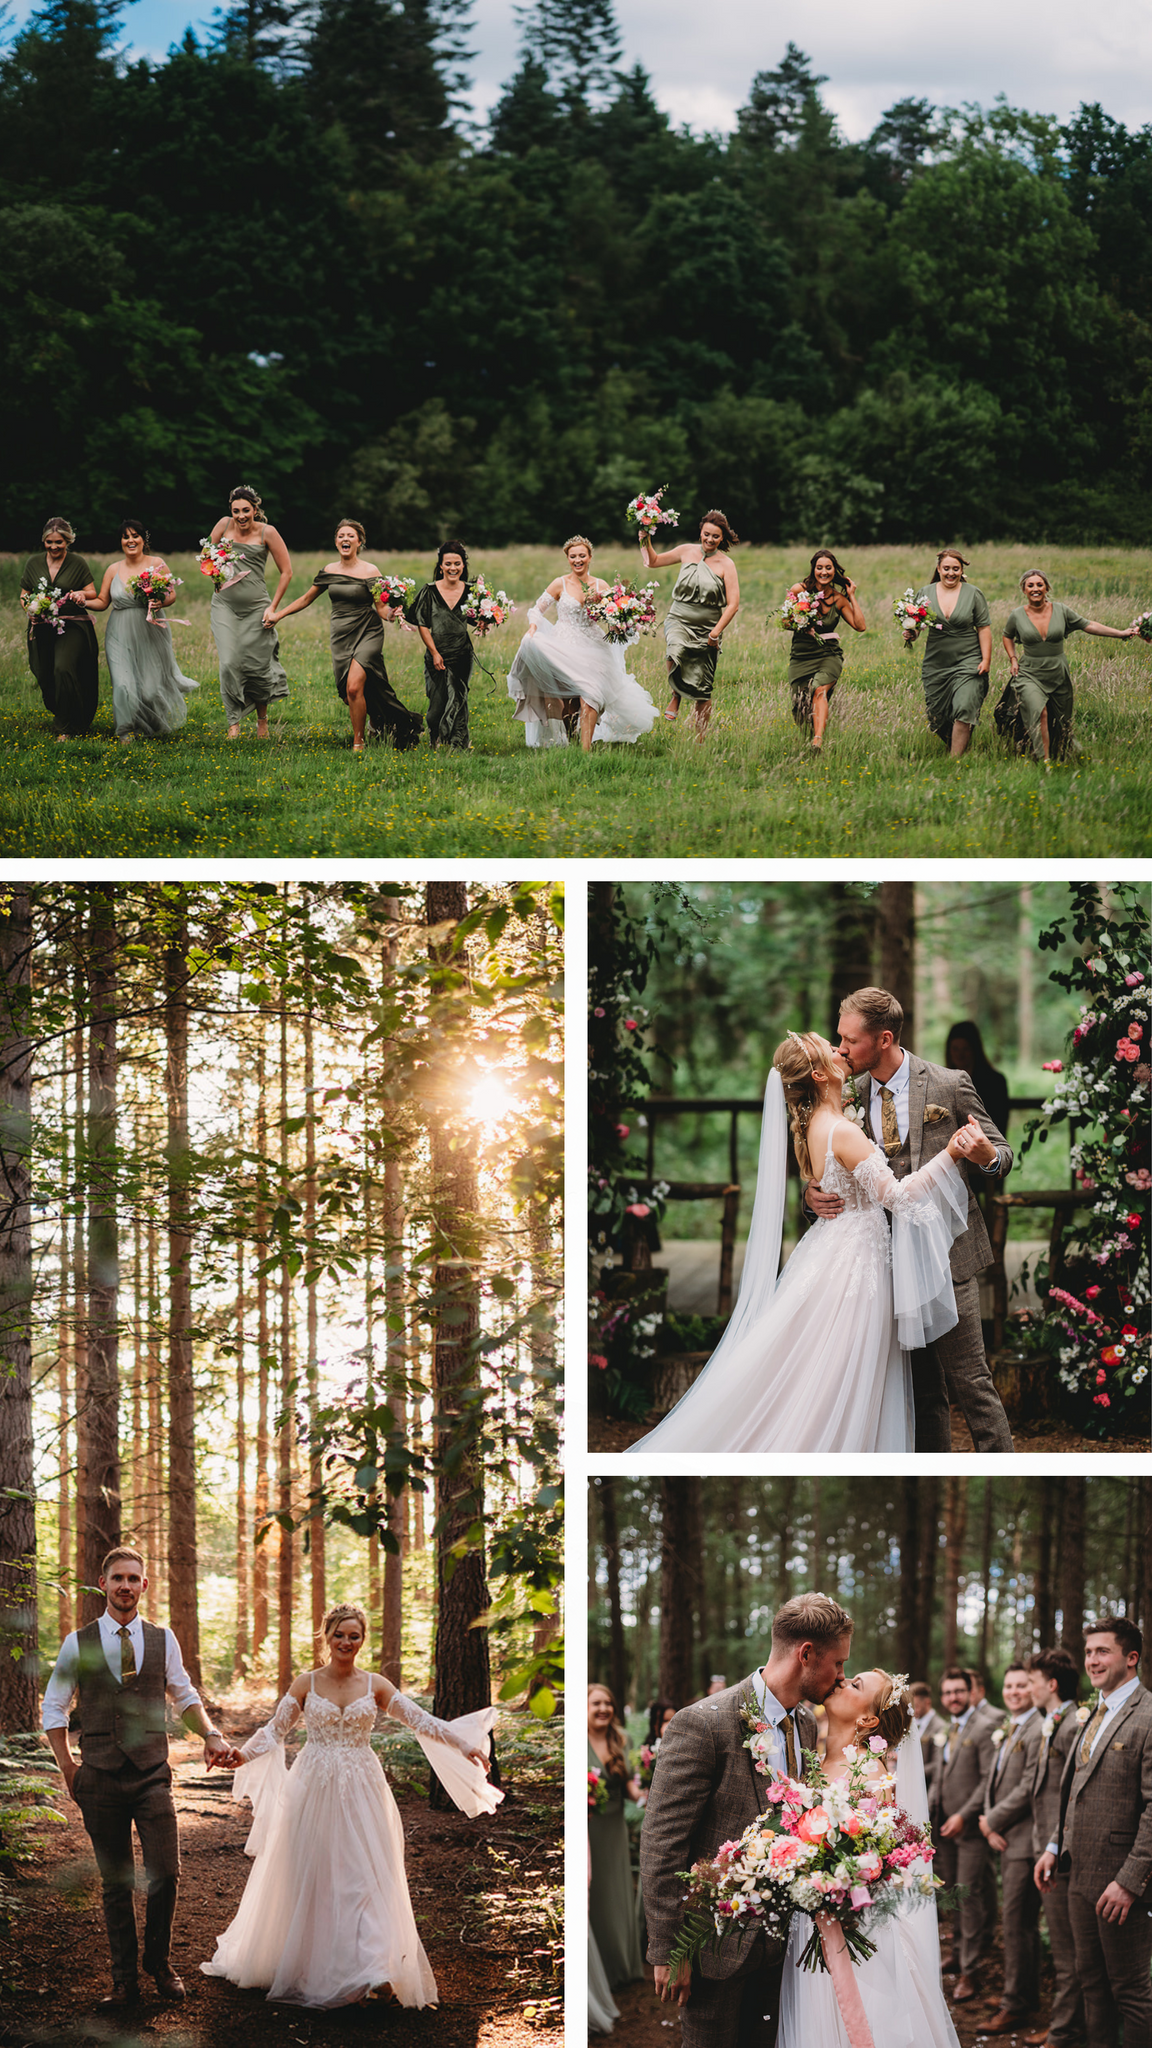 A fairytale forest wedding at Camp Katur